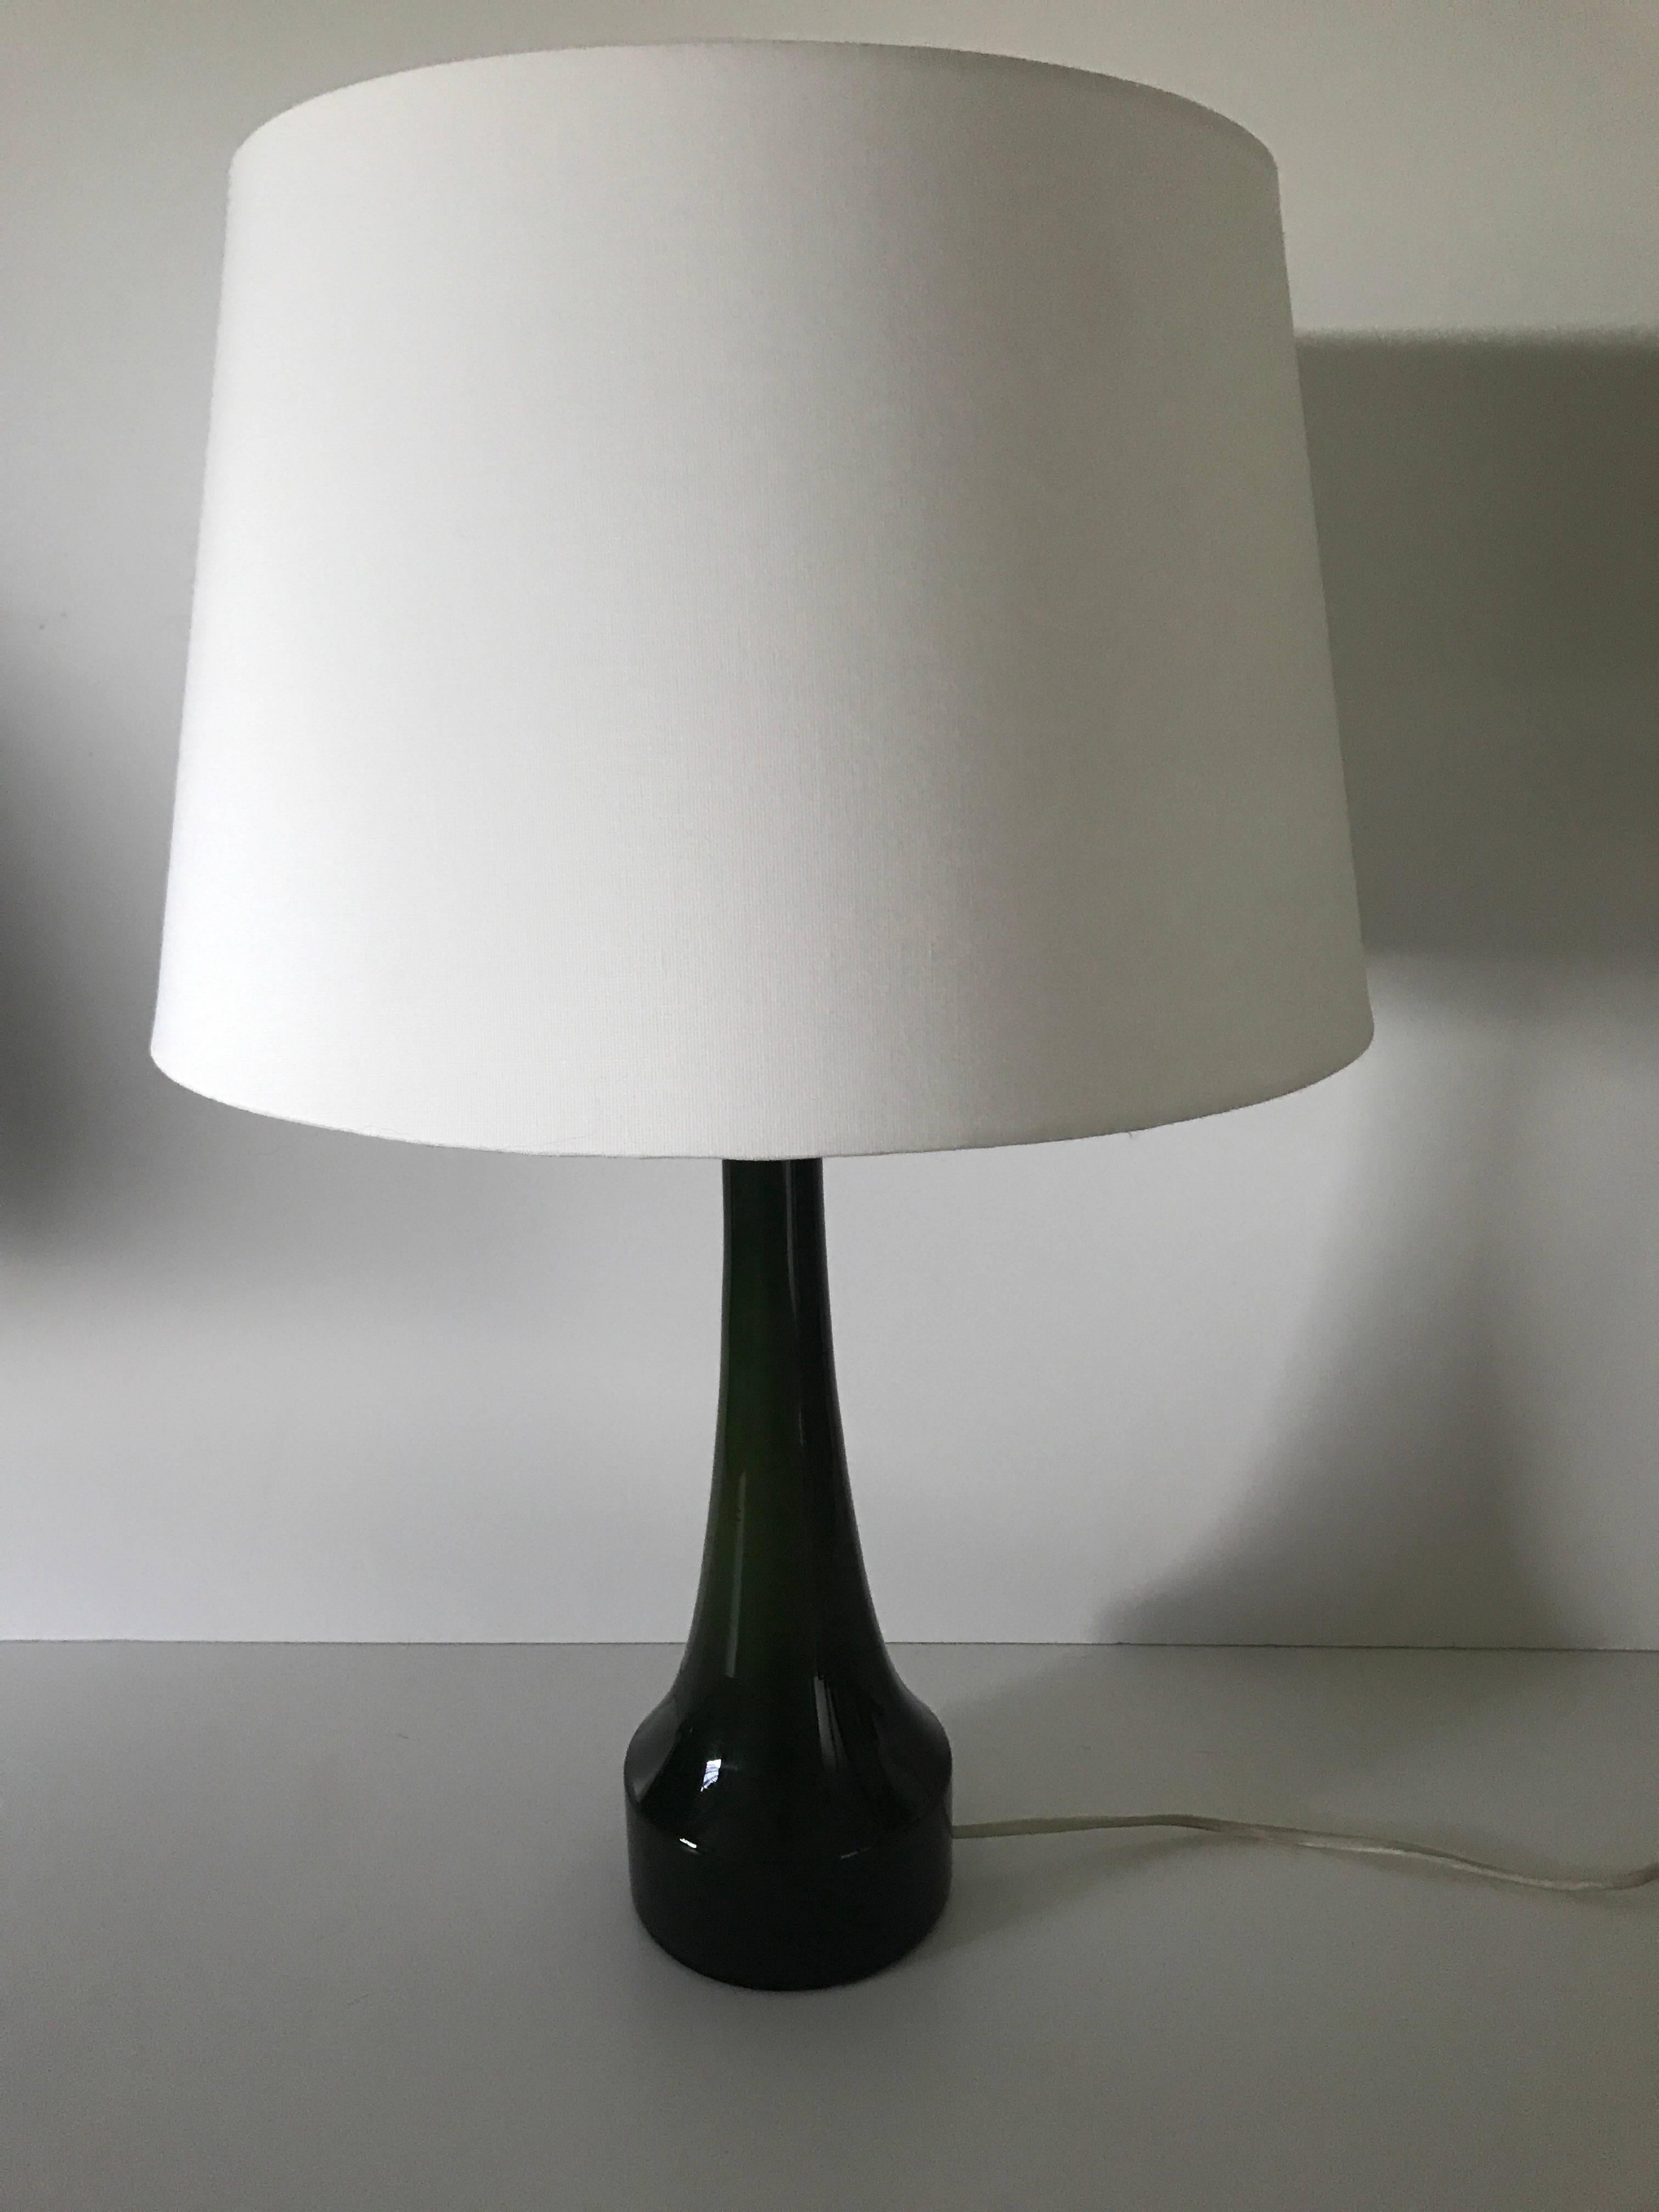 Swedish, 1955 Bergbom and Holmegaard green glass table lamp. A very nice dark green opaline glass table lamp in super condition. The height of the lamp is adjustable and pictured at 53 cm and the diameter of the shade is 34 cm.